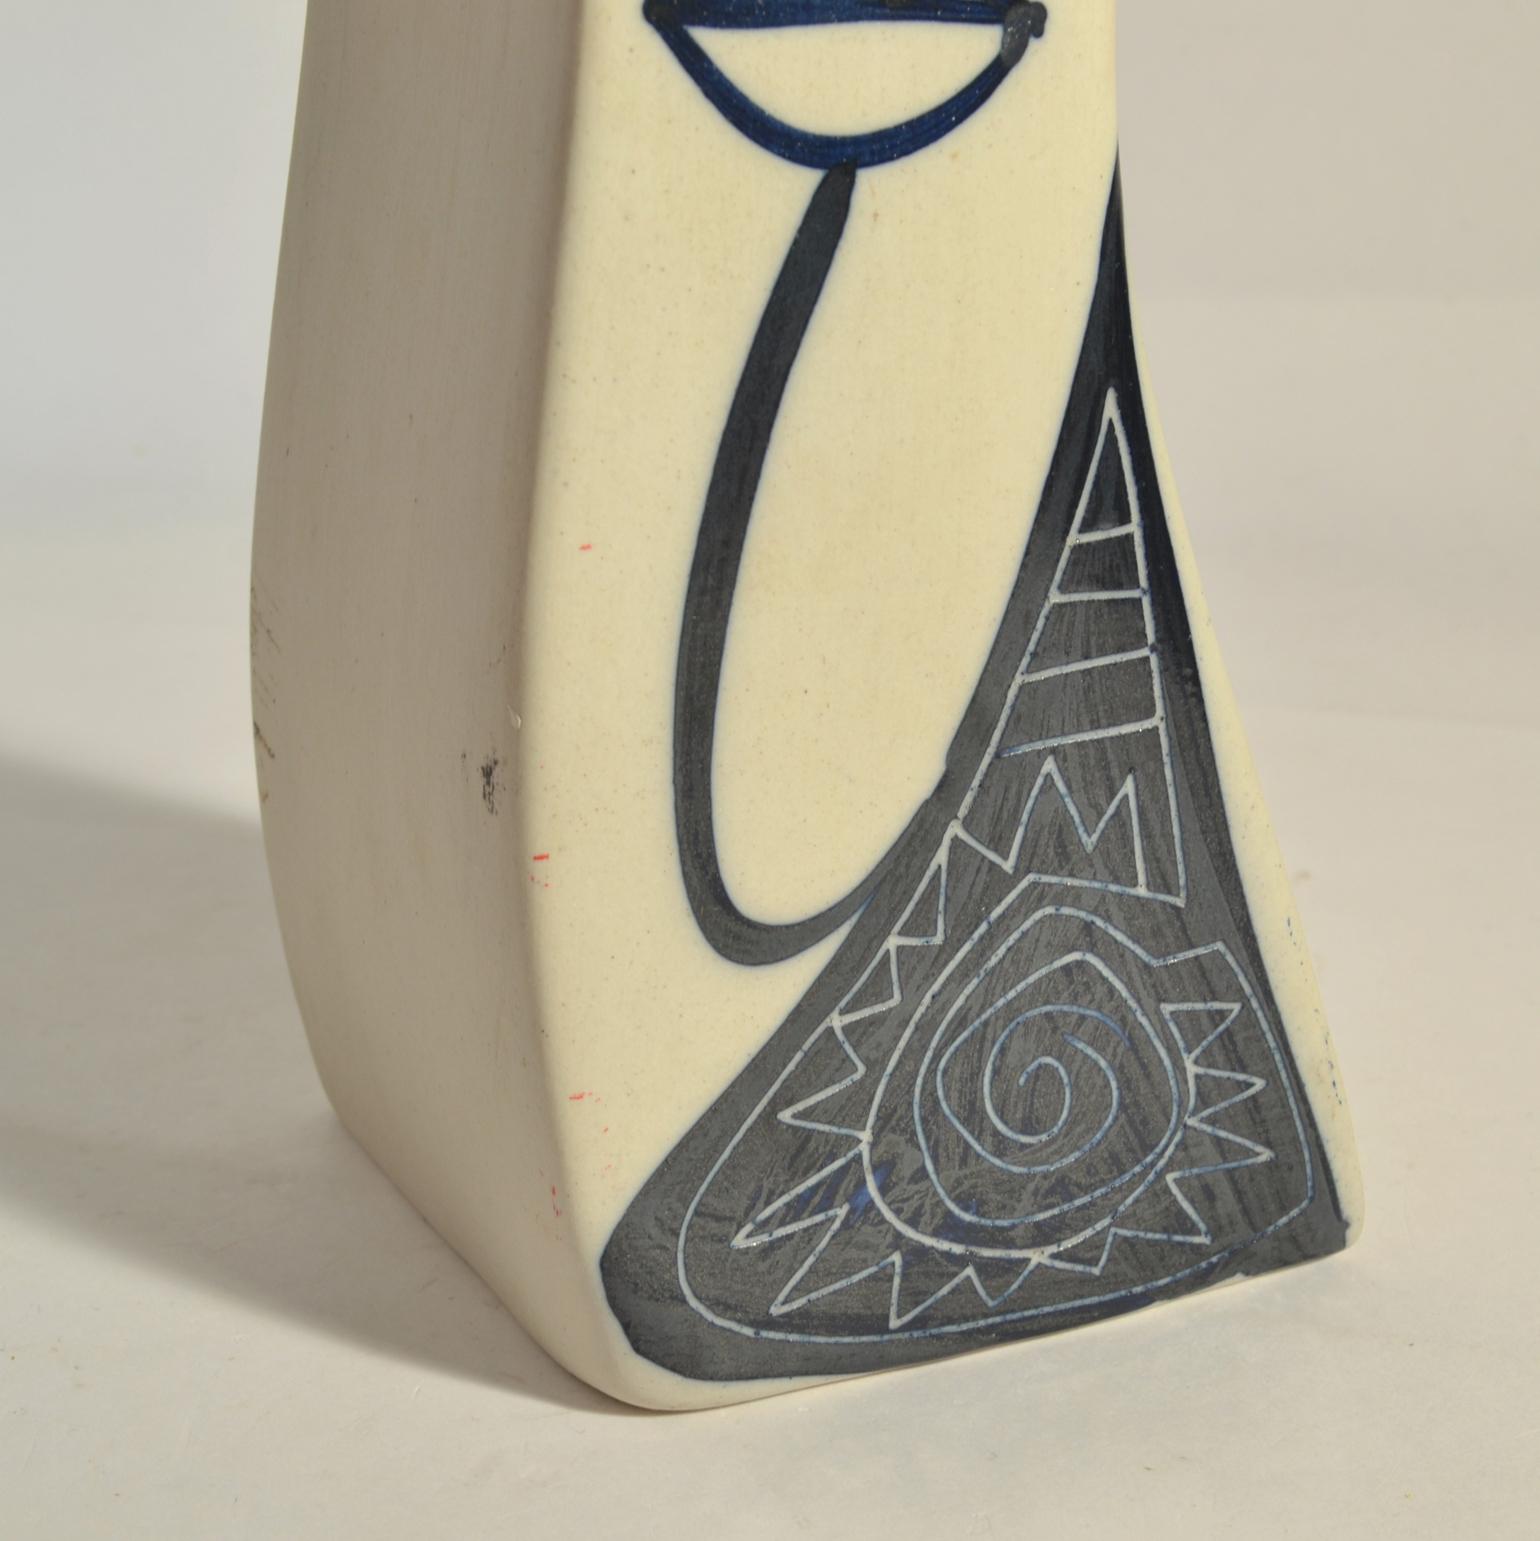 Ceramic Two Porcelain Freeform Vases with Hand Painted Expressive Faces